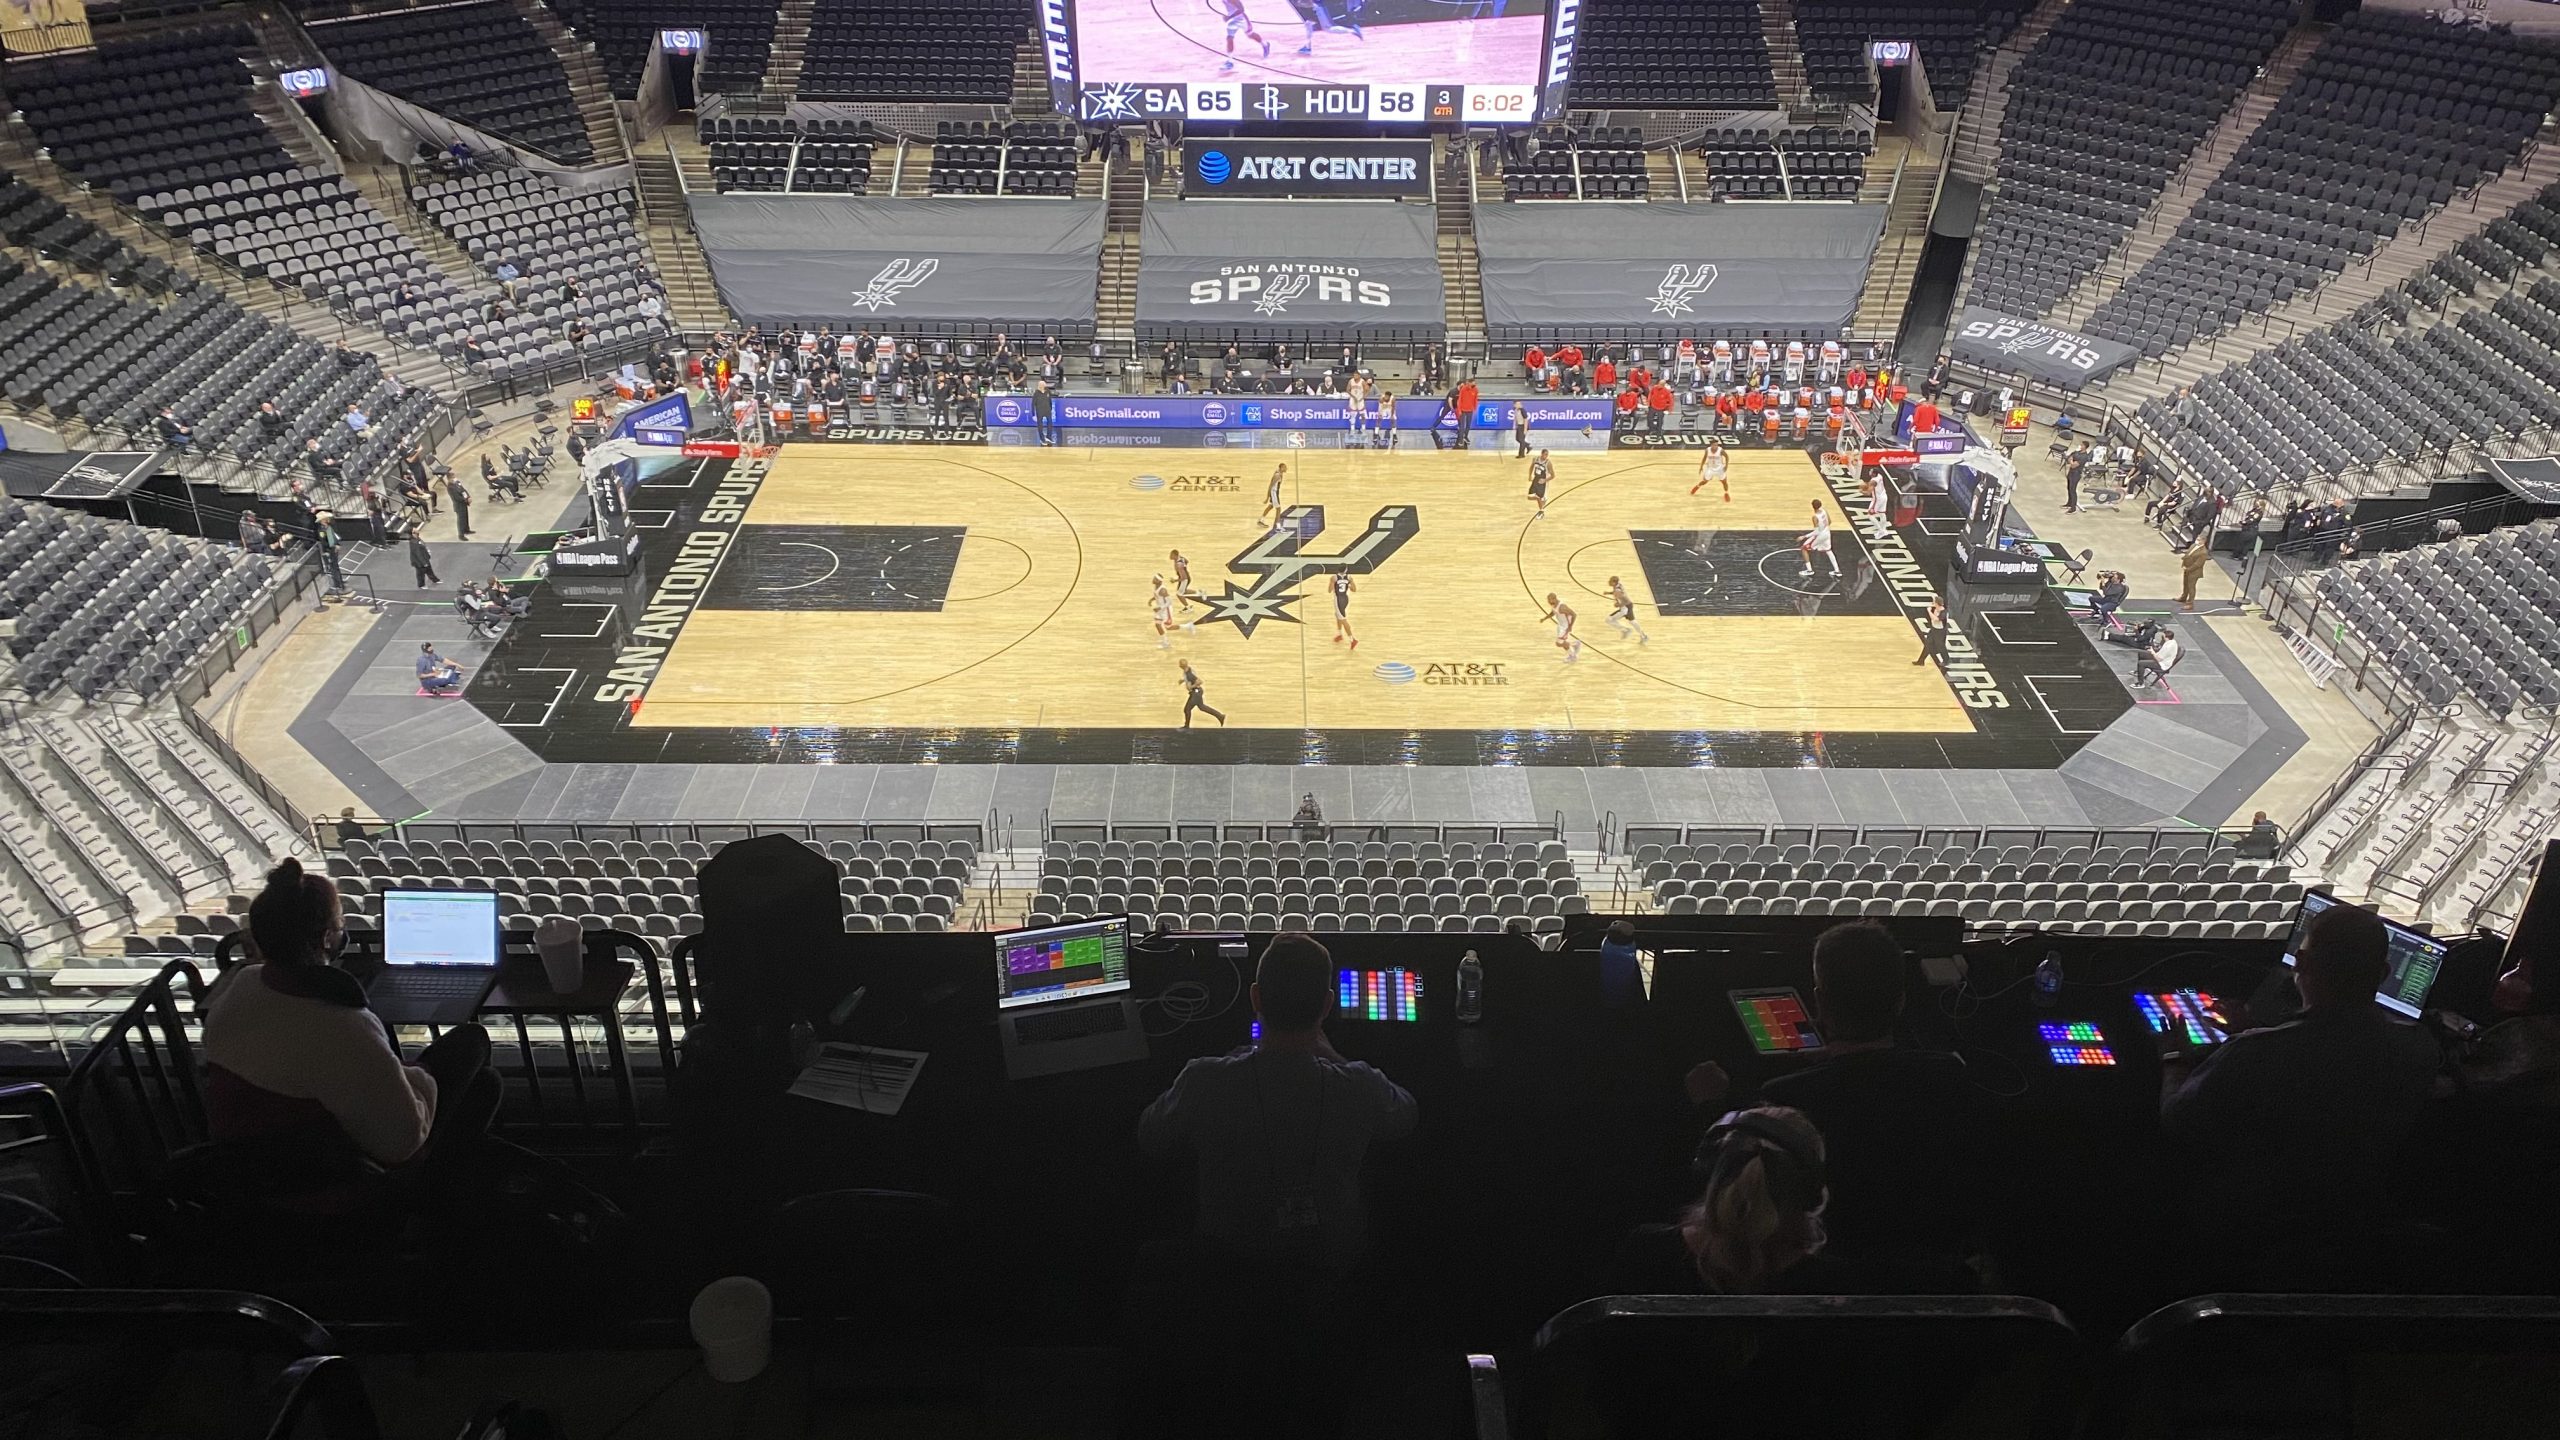 Spurs Give providing free WiFi from the AT&T Center